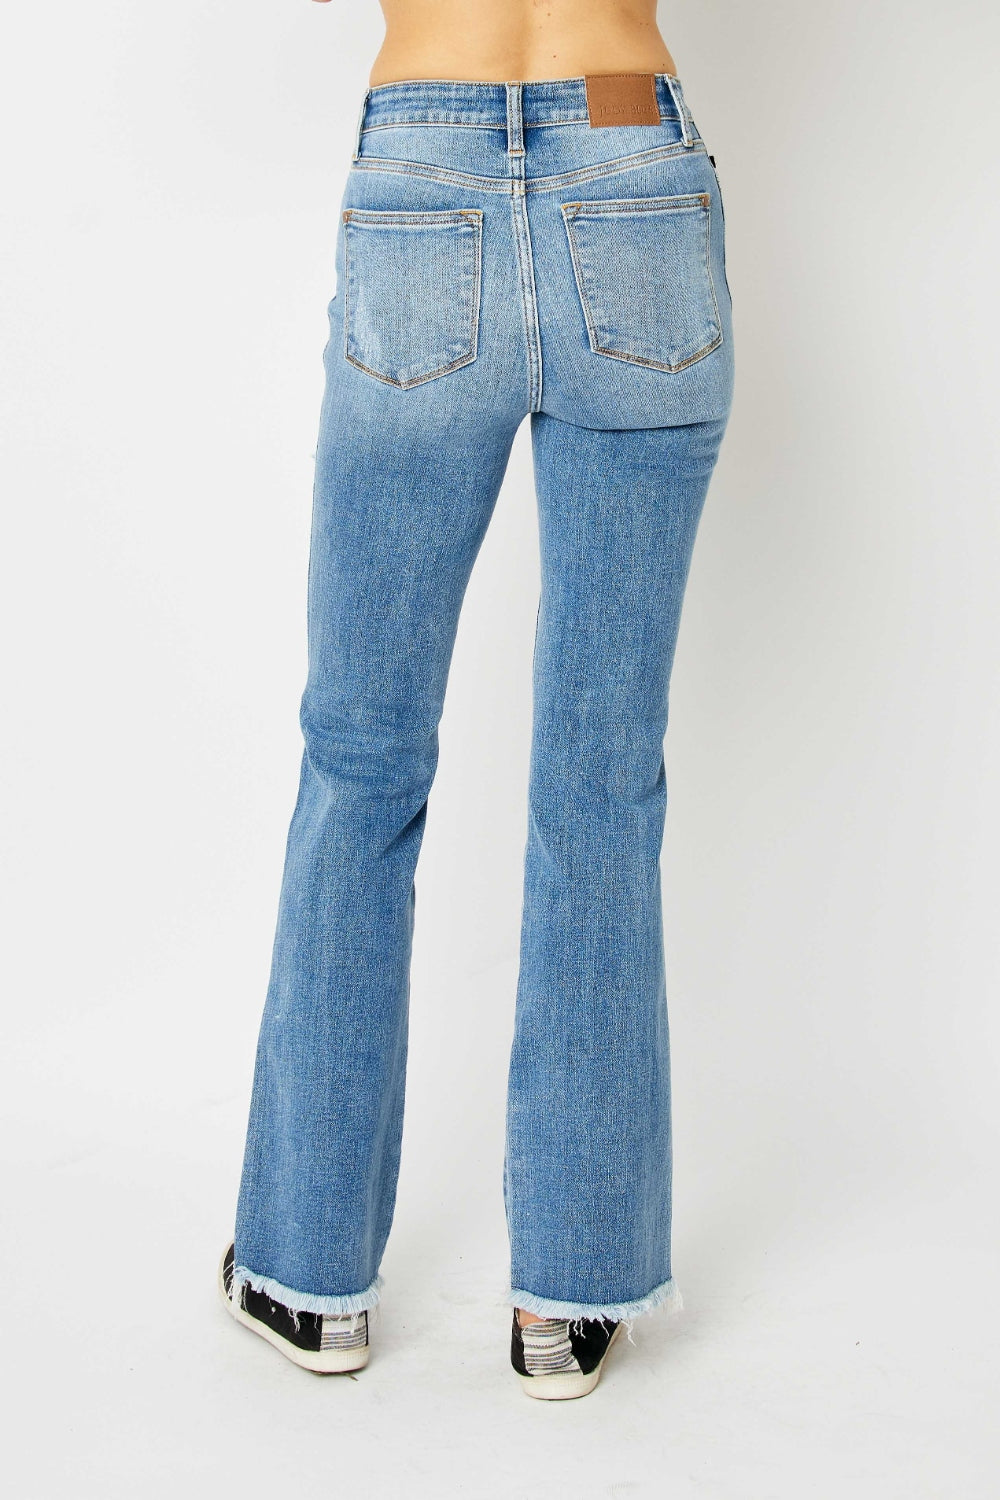 Judy Blue Full Size Distressed Raw Hem Bootcut Jeans-Denim-Inspired by Justeen-Women's Clothing Boutique in Chicago, Illinois